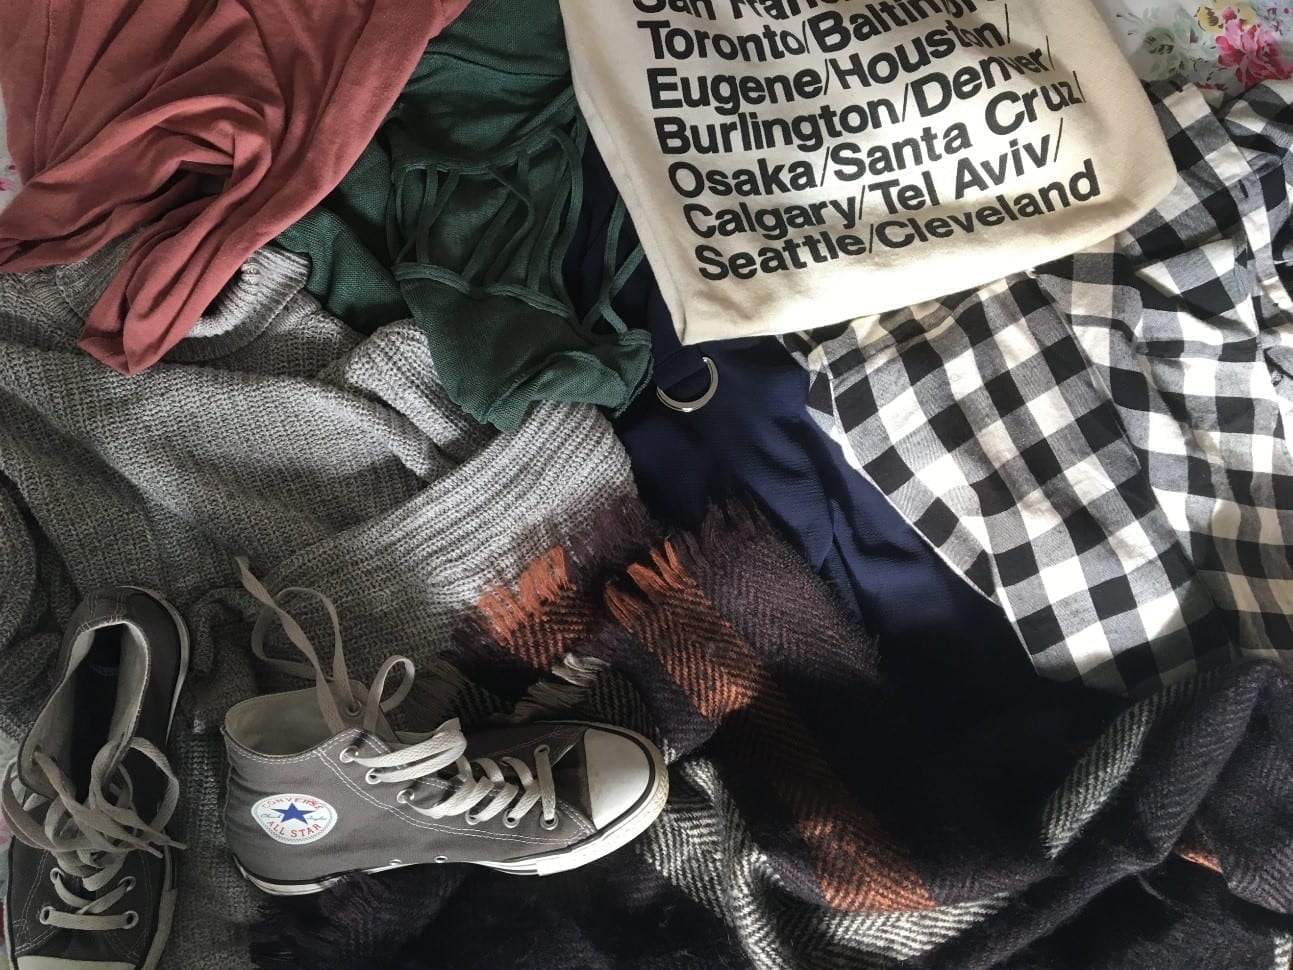 Pile of clothes, tote-bag and converse shoes.